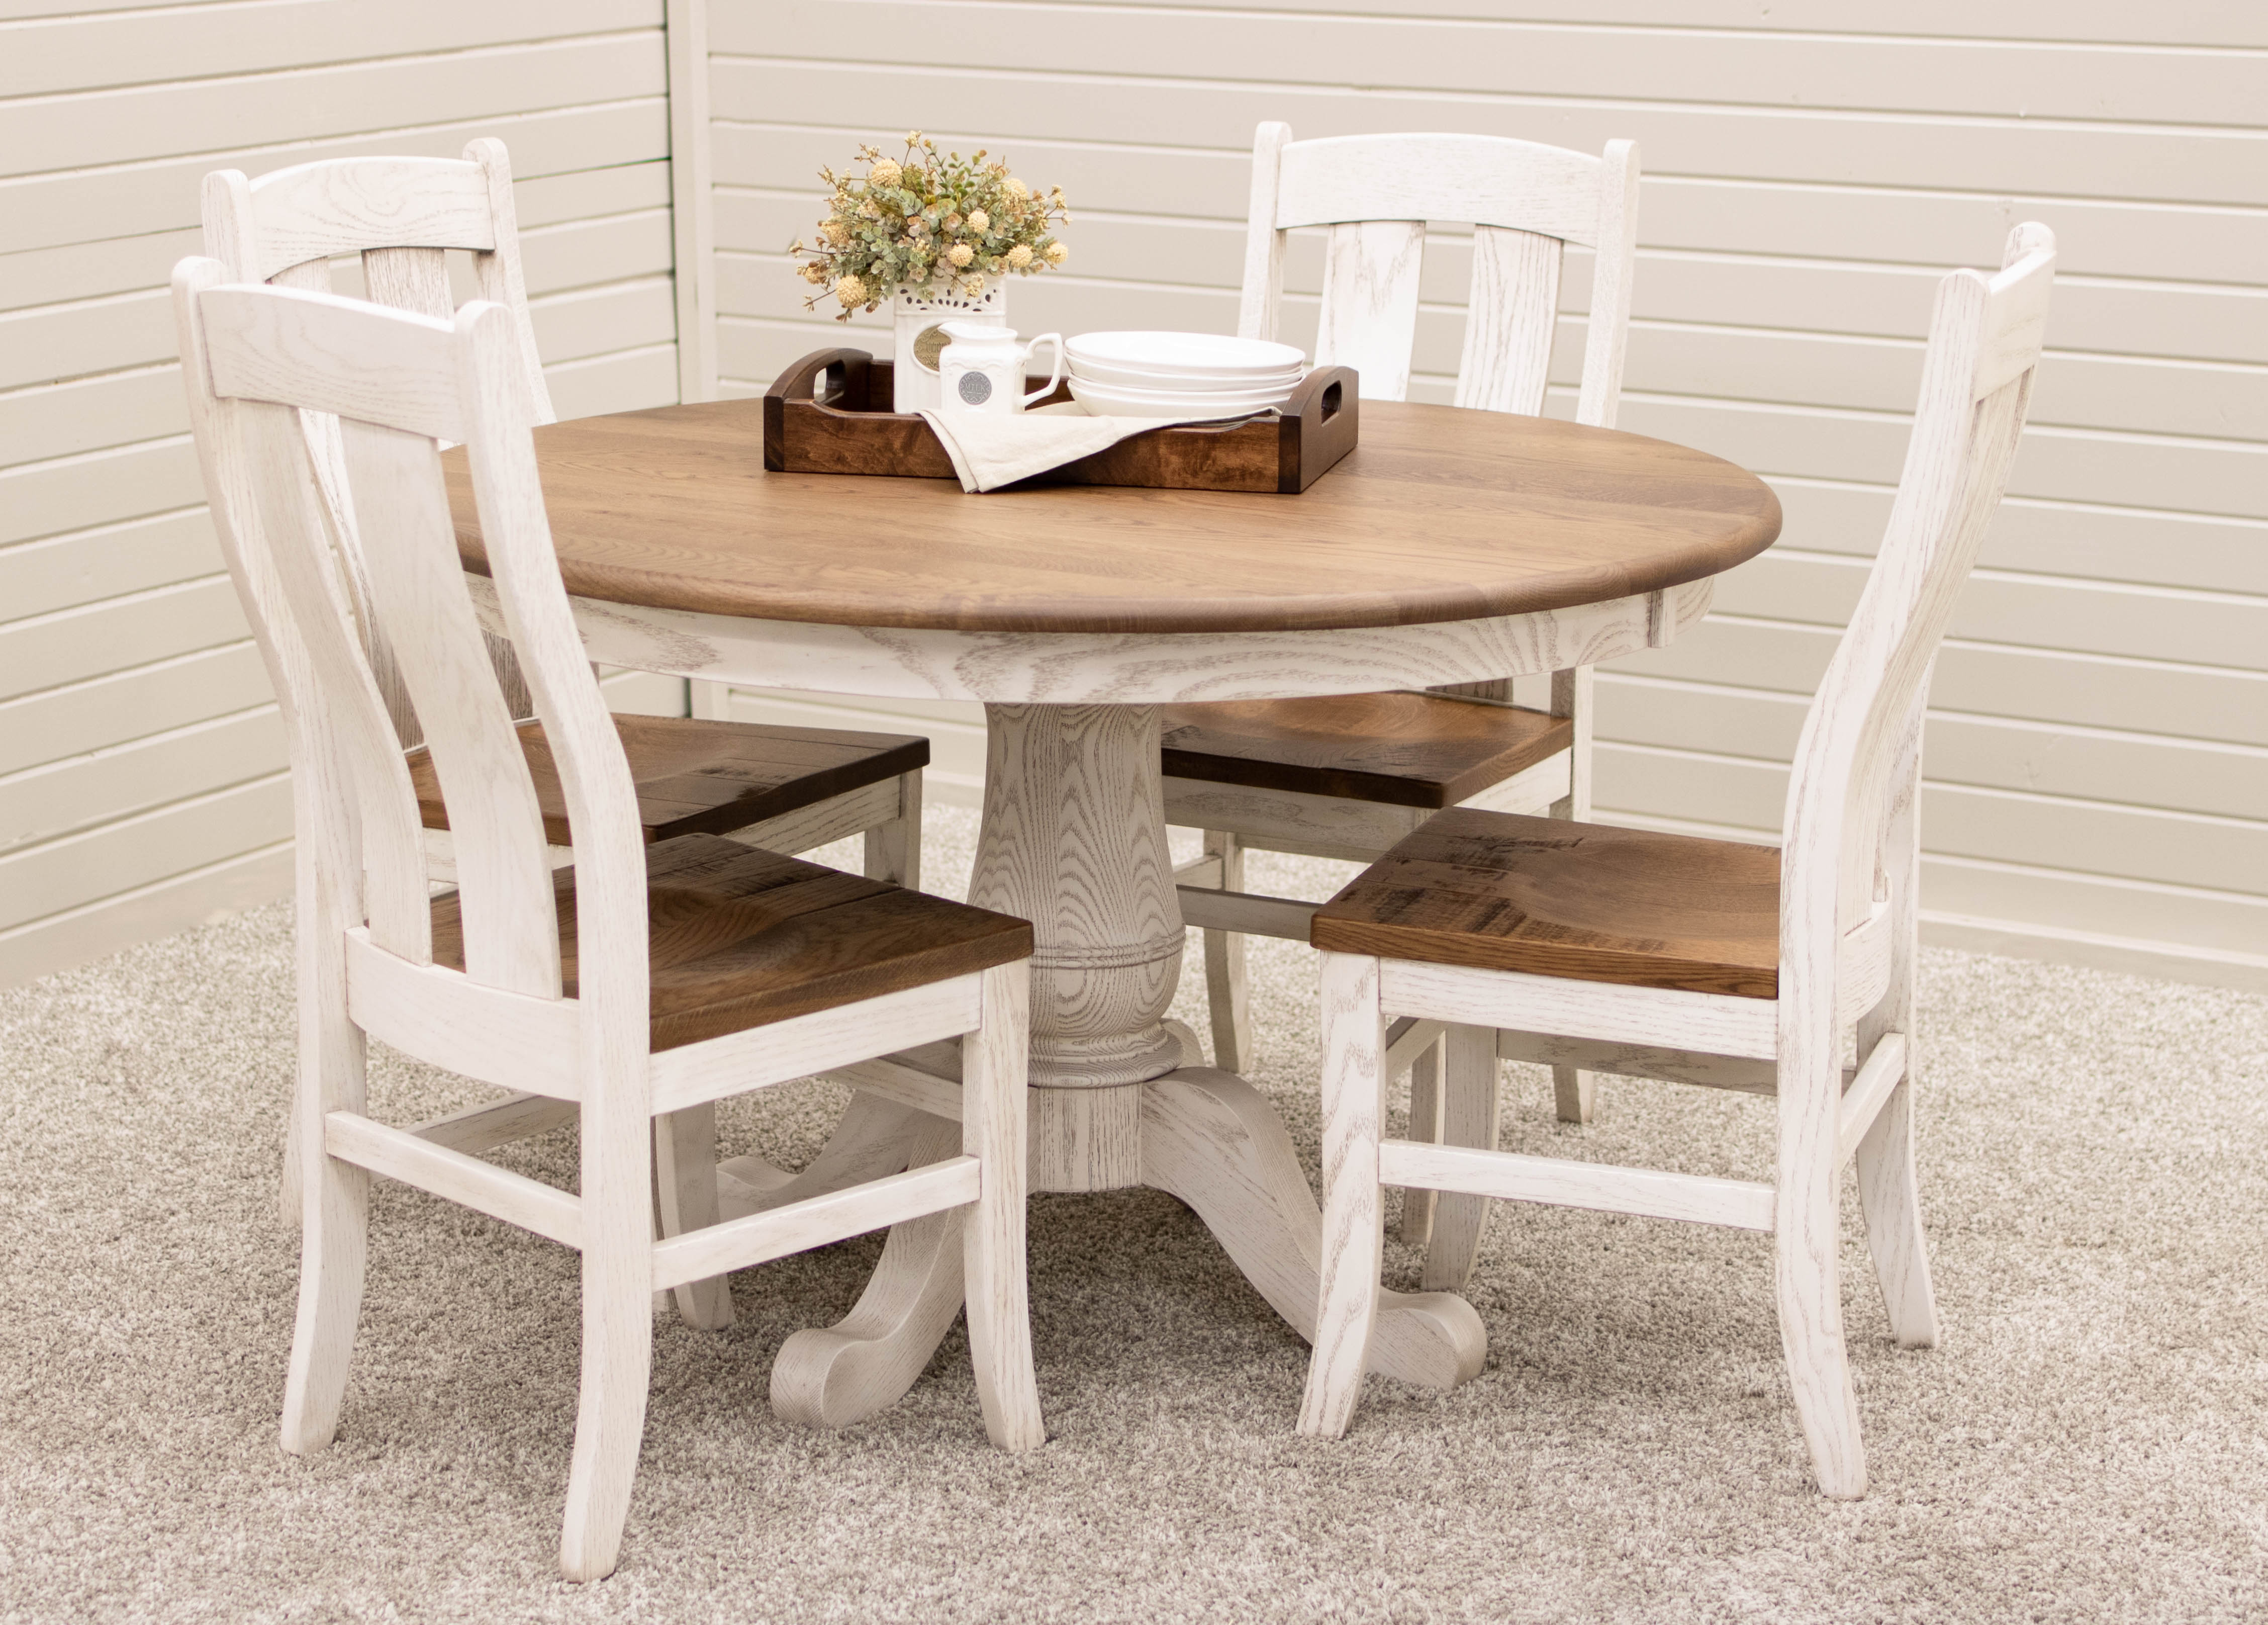 Ellington Small Round Dining Table for 4